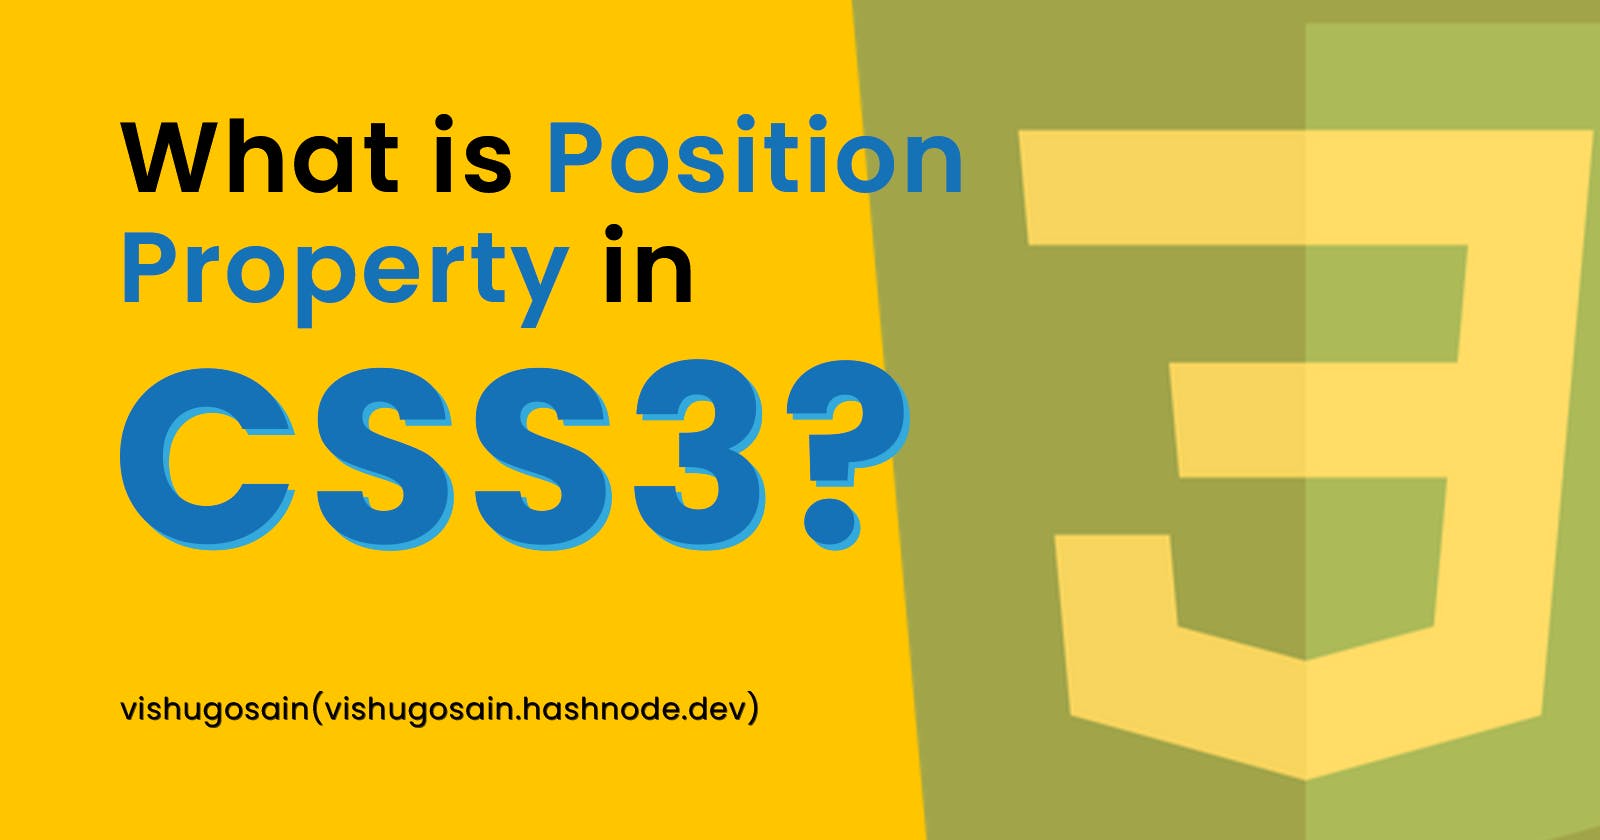 What is position property in CSS 3 ?